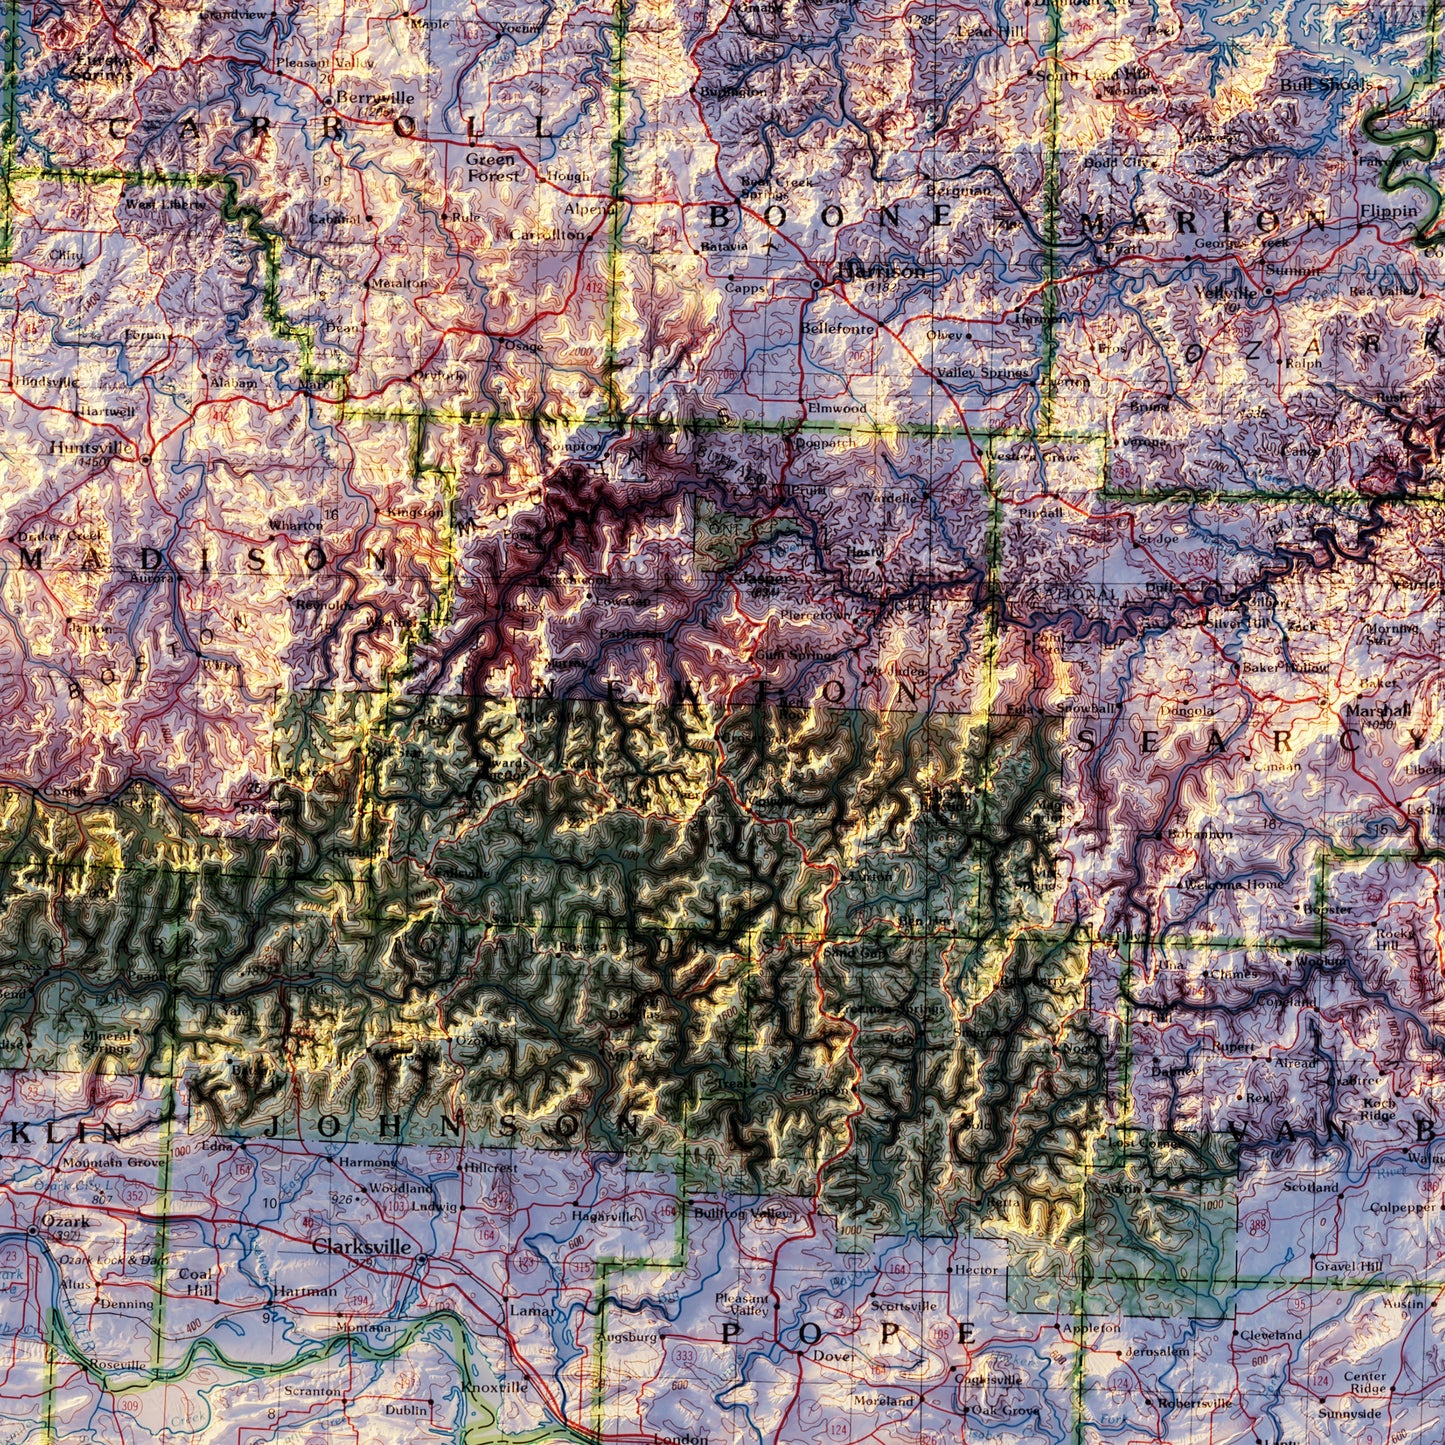 Arkansas 1990 Shaded Relief Map